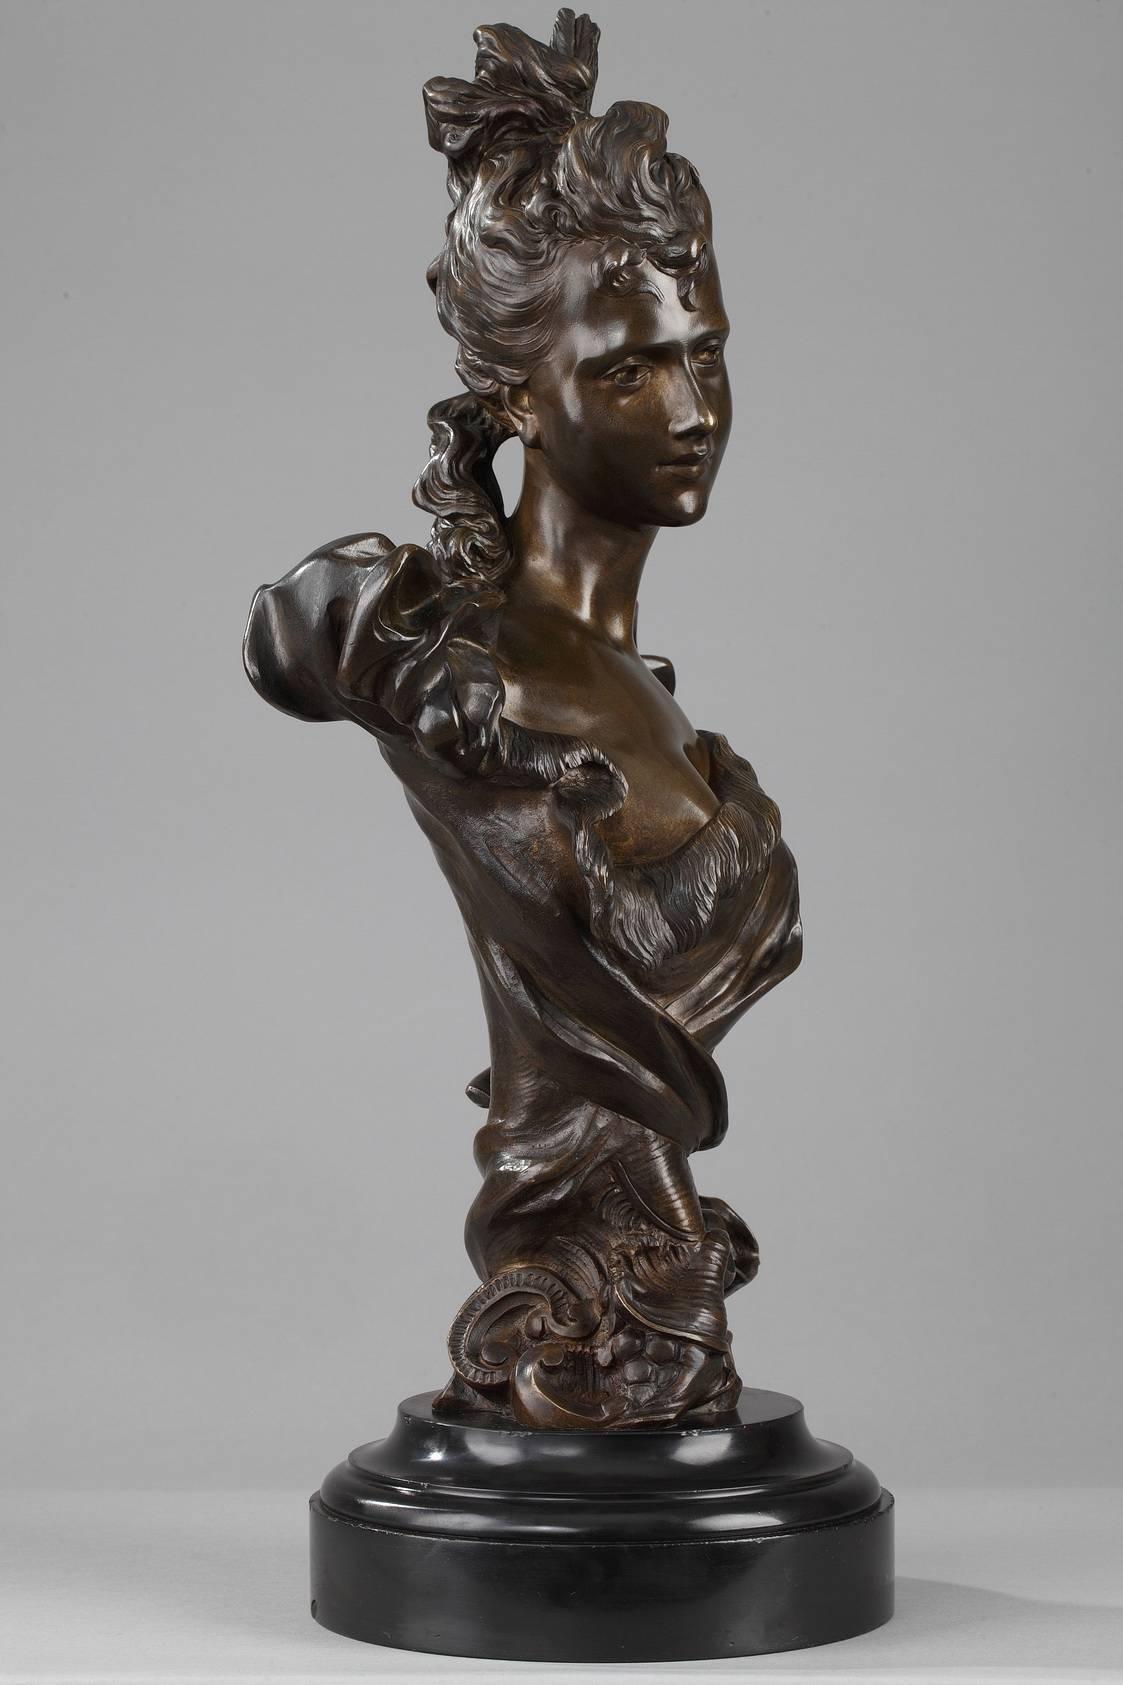 Bust of a woman in nuanced, patinated bronze attributed to the Belgian sculptor Georges Van der Straeten. She is wearing an elegant dress with a ribboned neckline, flowing capped sleeves, and a sash that crosses at her waist. Her lightly curly hair